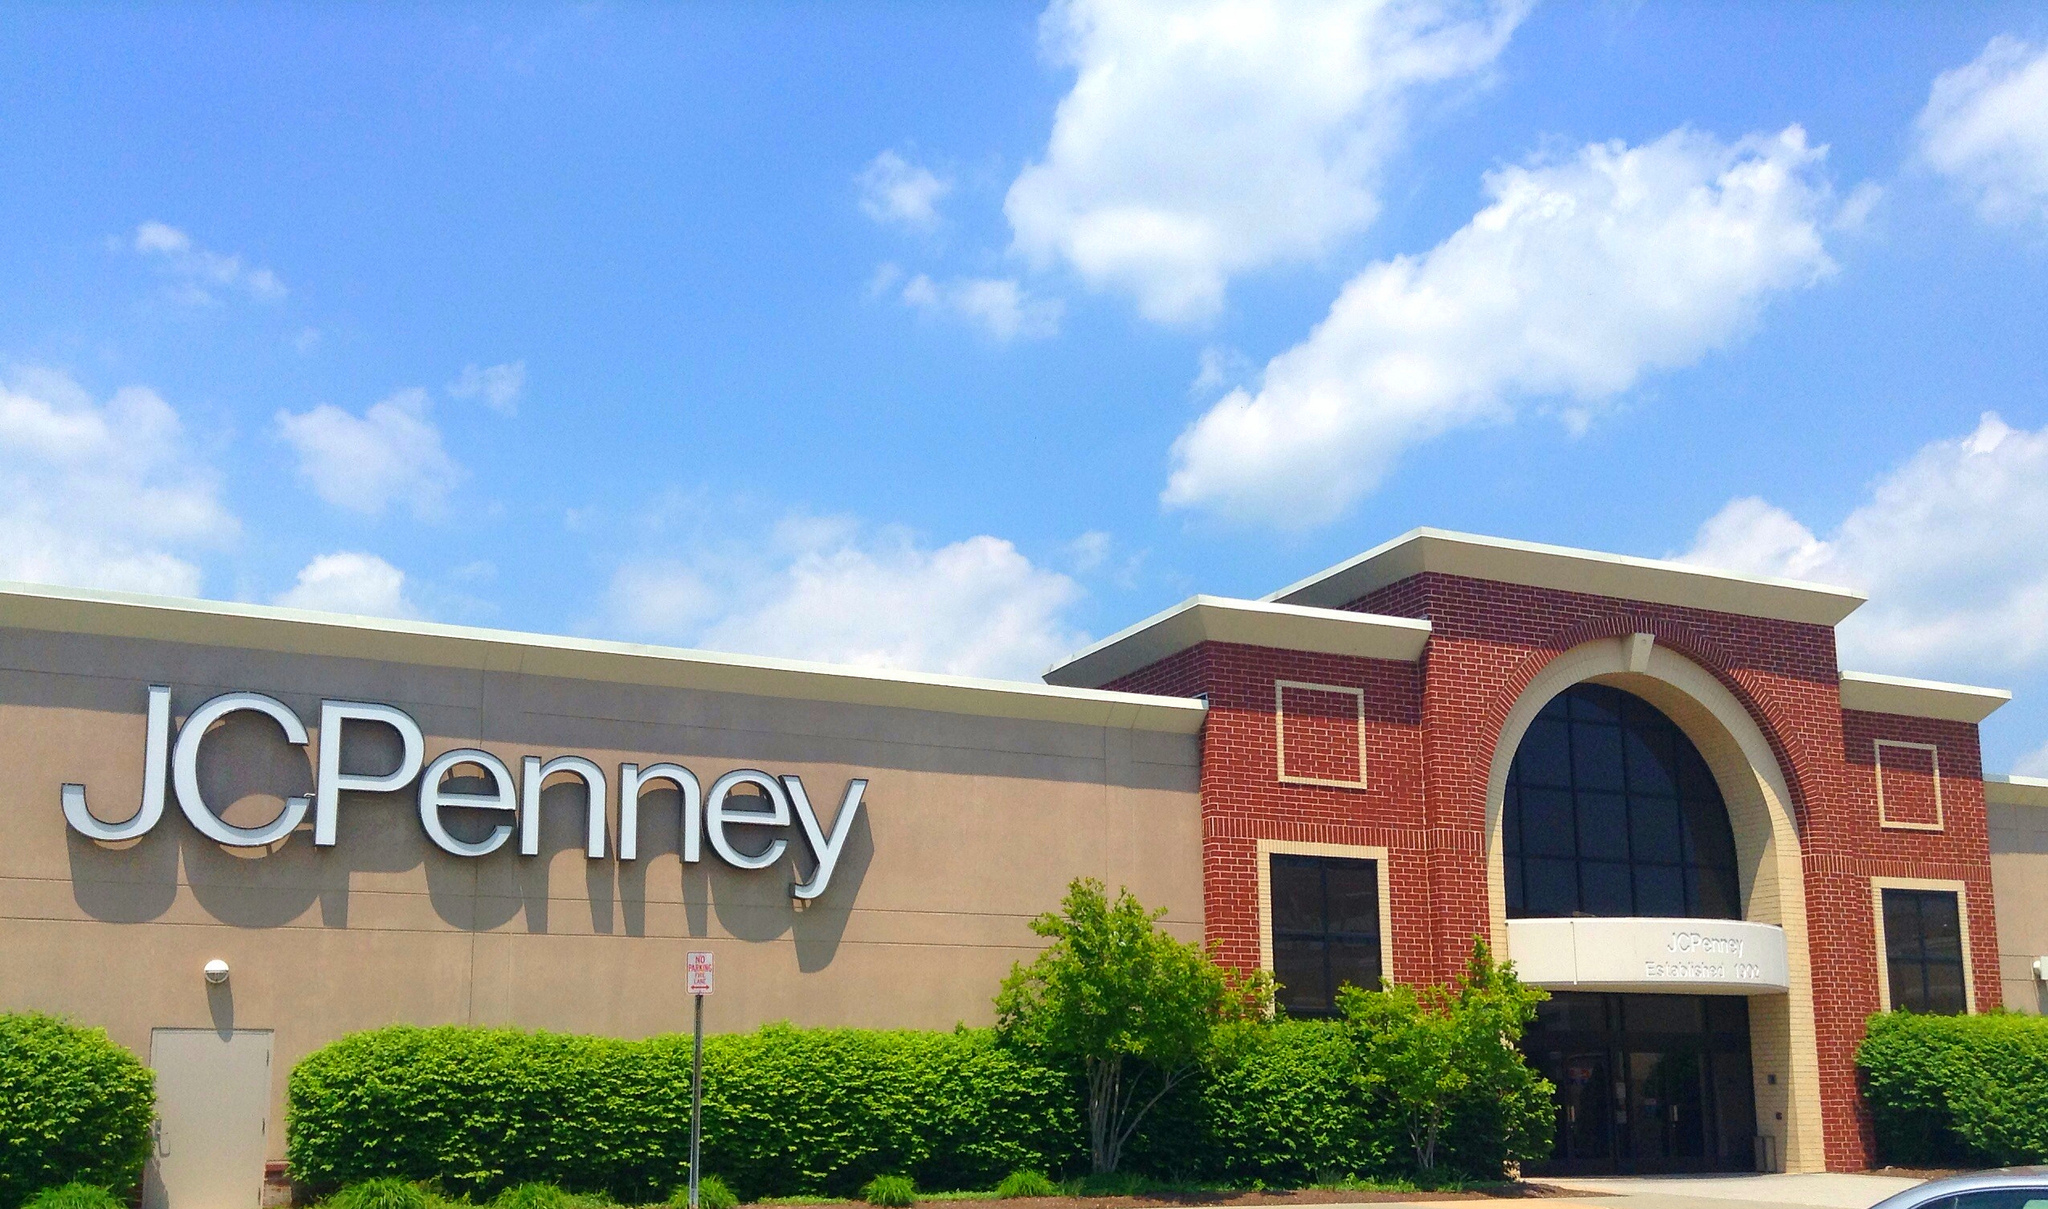 Lawsuit Over JCPenney’s Alleged Imaginary Discounts Receives Class Action Status